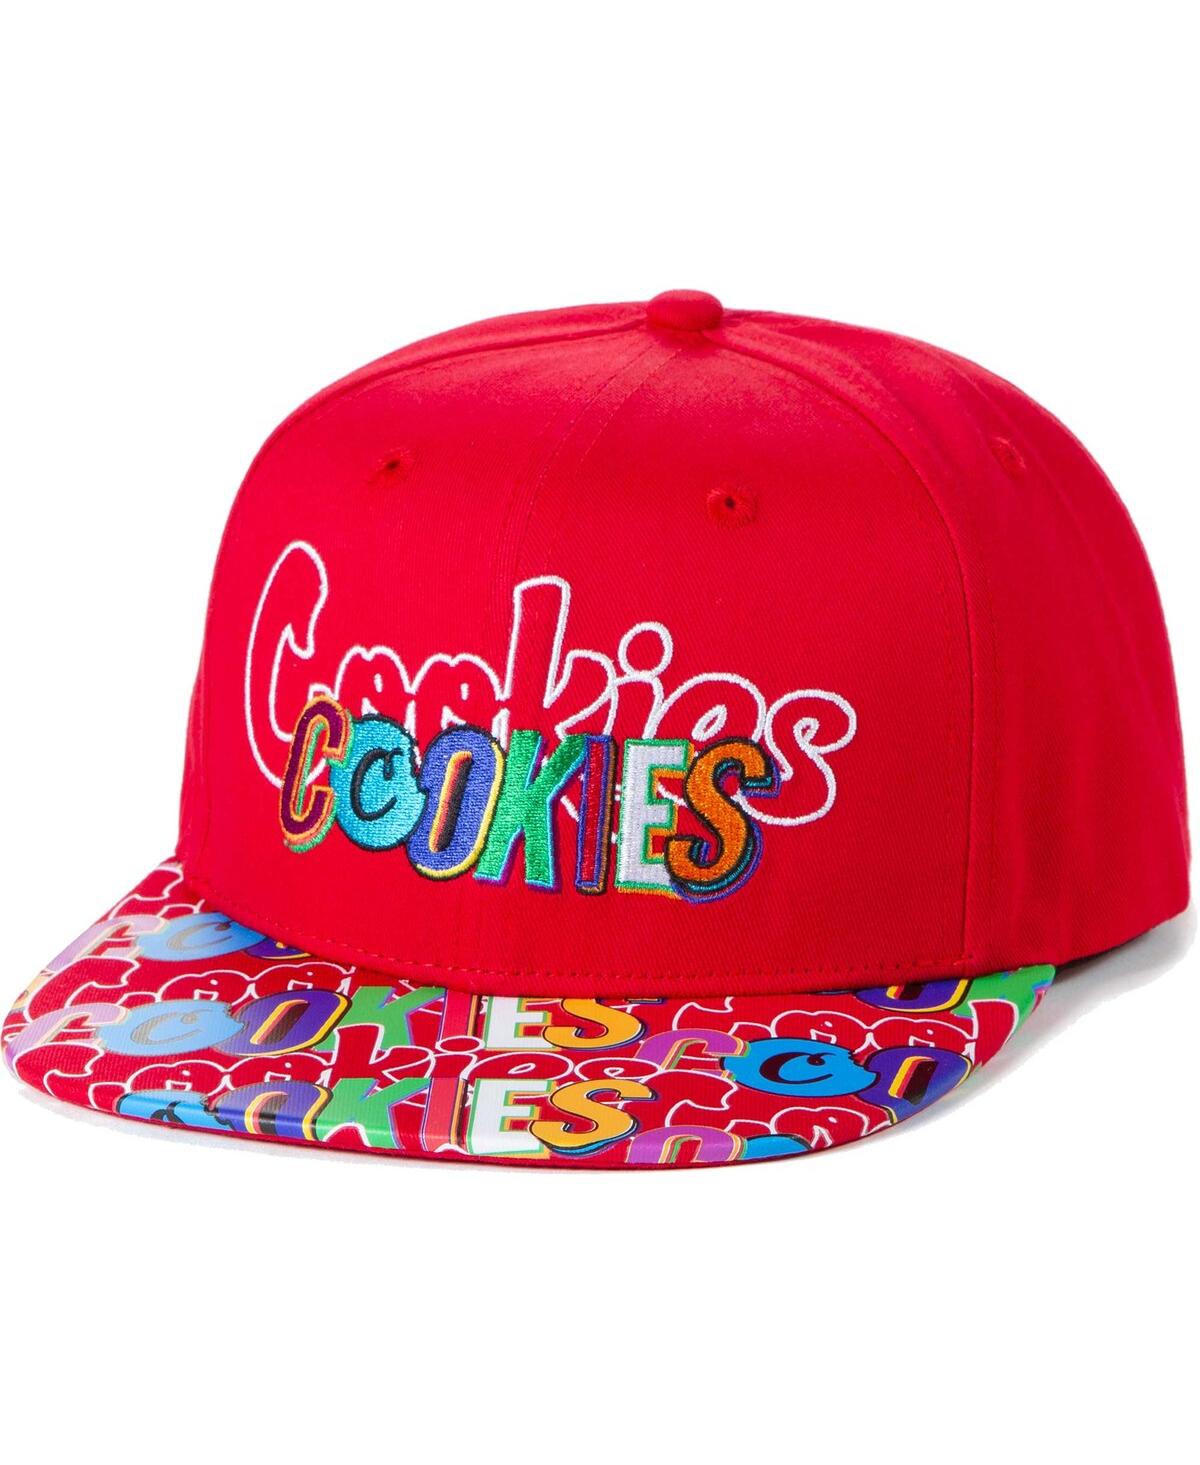 Cookies Men's  Clothing Red On The Block Snapback Hat